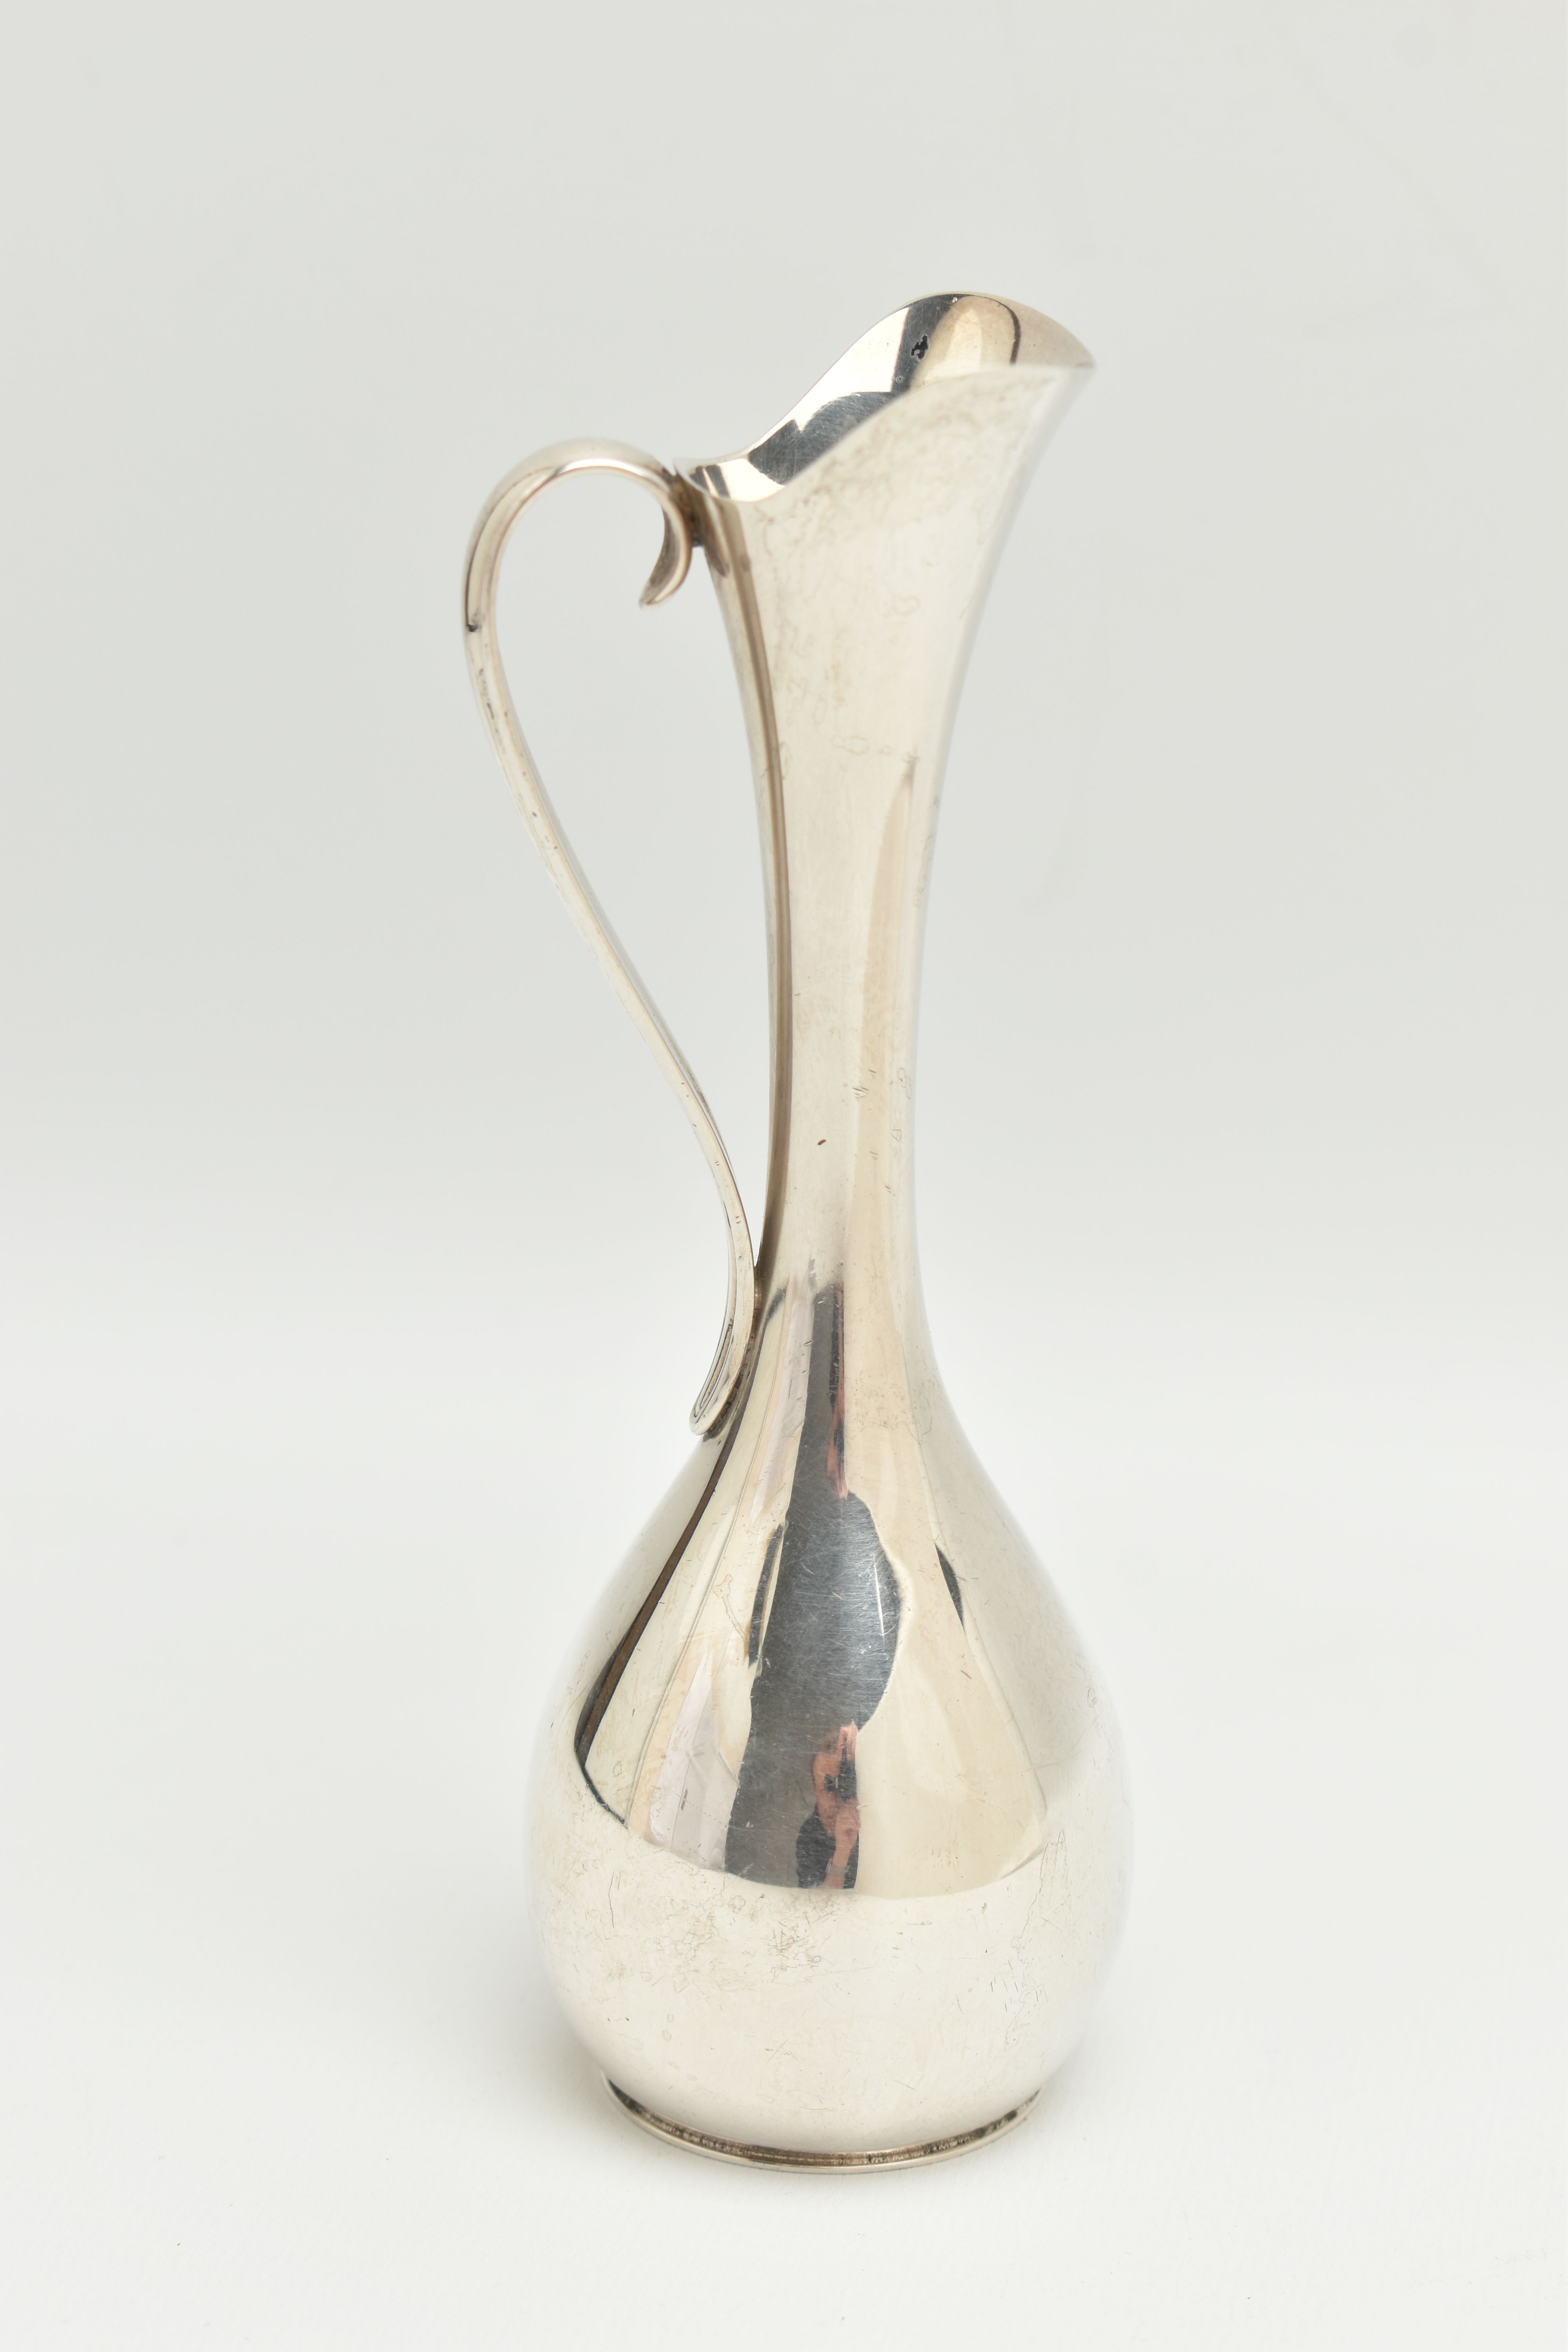 A LATE 20TH CENTURY DANISH SILVER PLATED BUD VASE IN THE FORM OF A JUG, sinuous strap handle, - Image 2 of 6